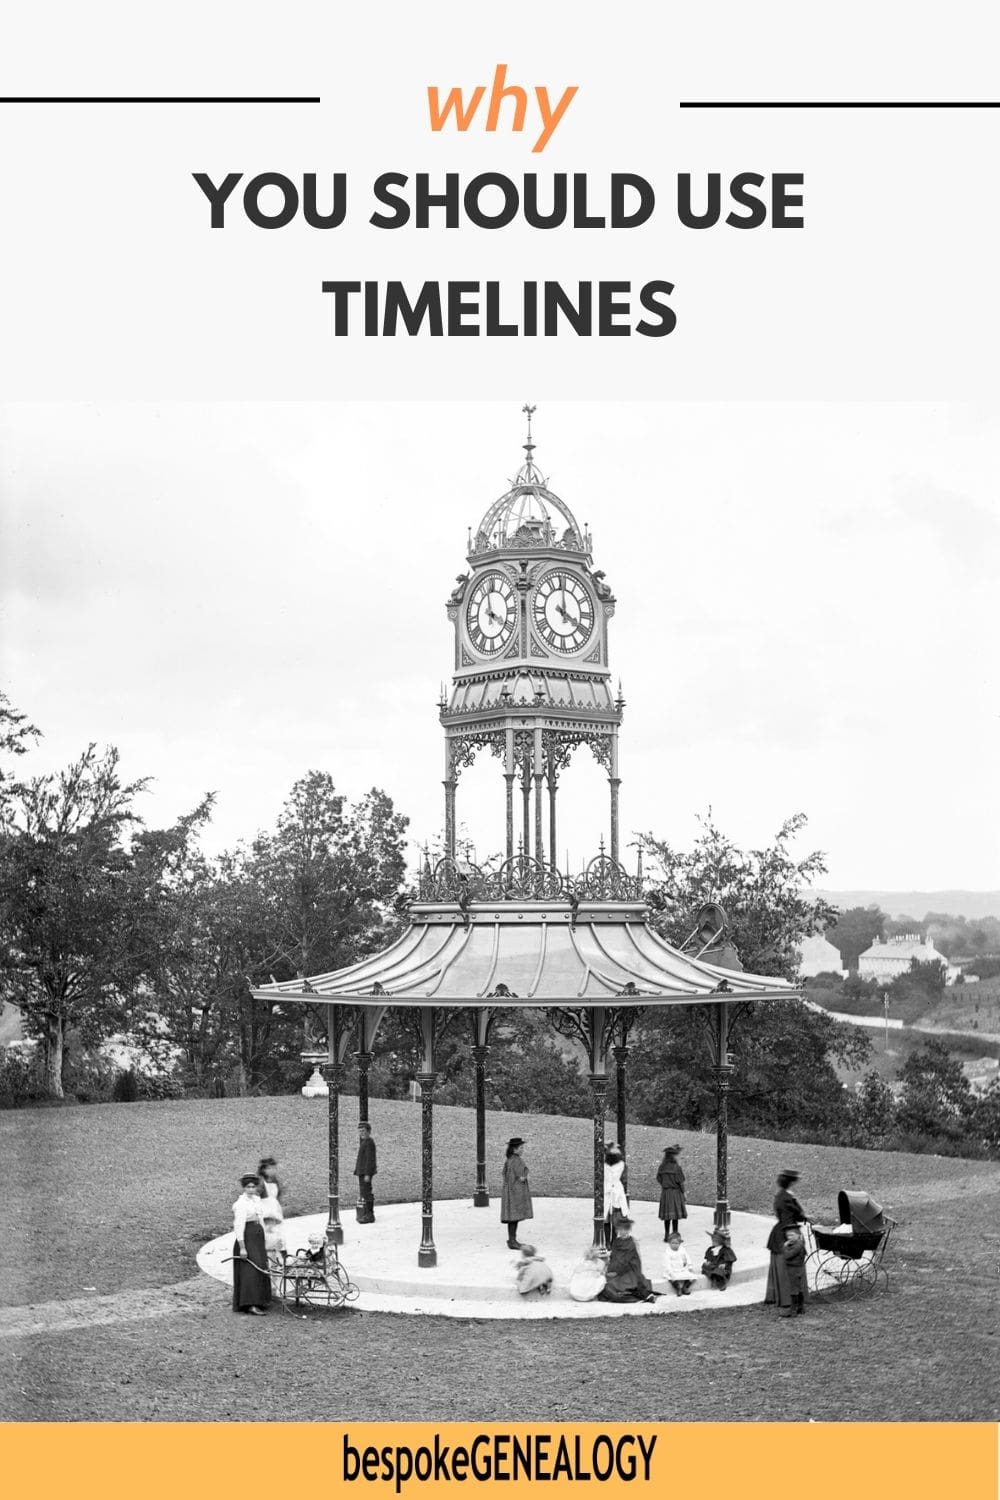 Pinterest pin. Why you should use timelines. Vintage photo of a group of people standing under a bandstand with clock on top.